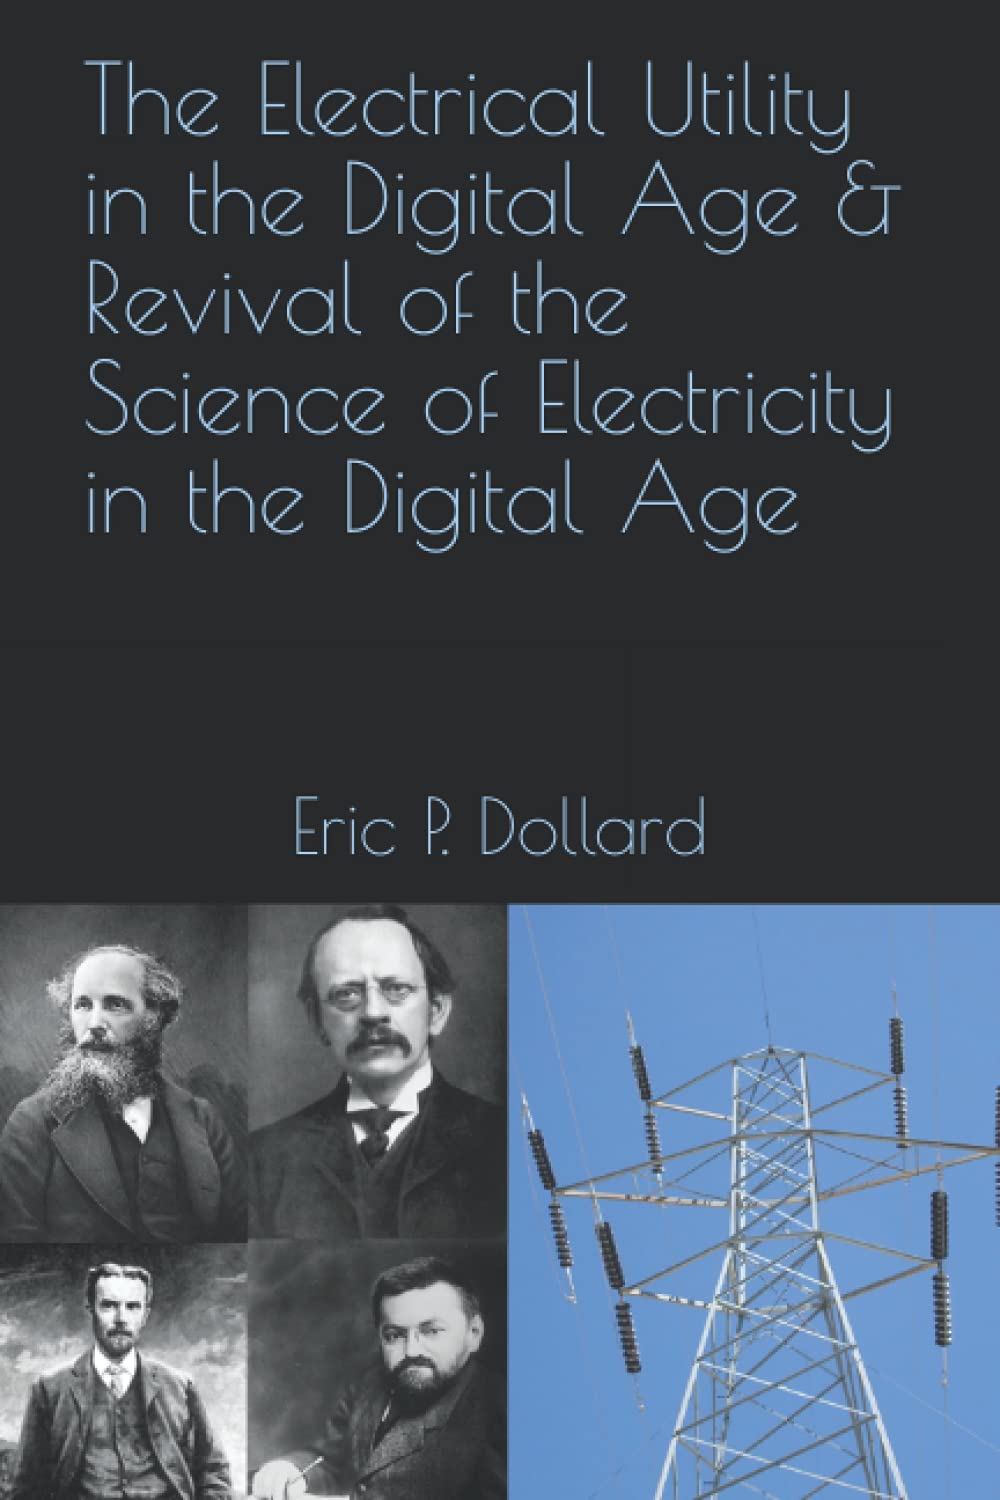 The Electrical Utility in the Digital Age & Revival of the Science of Electricity in the Digital Age by Eric Dollard